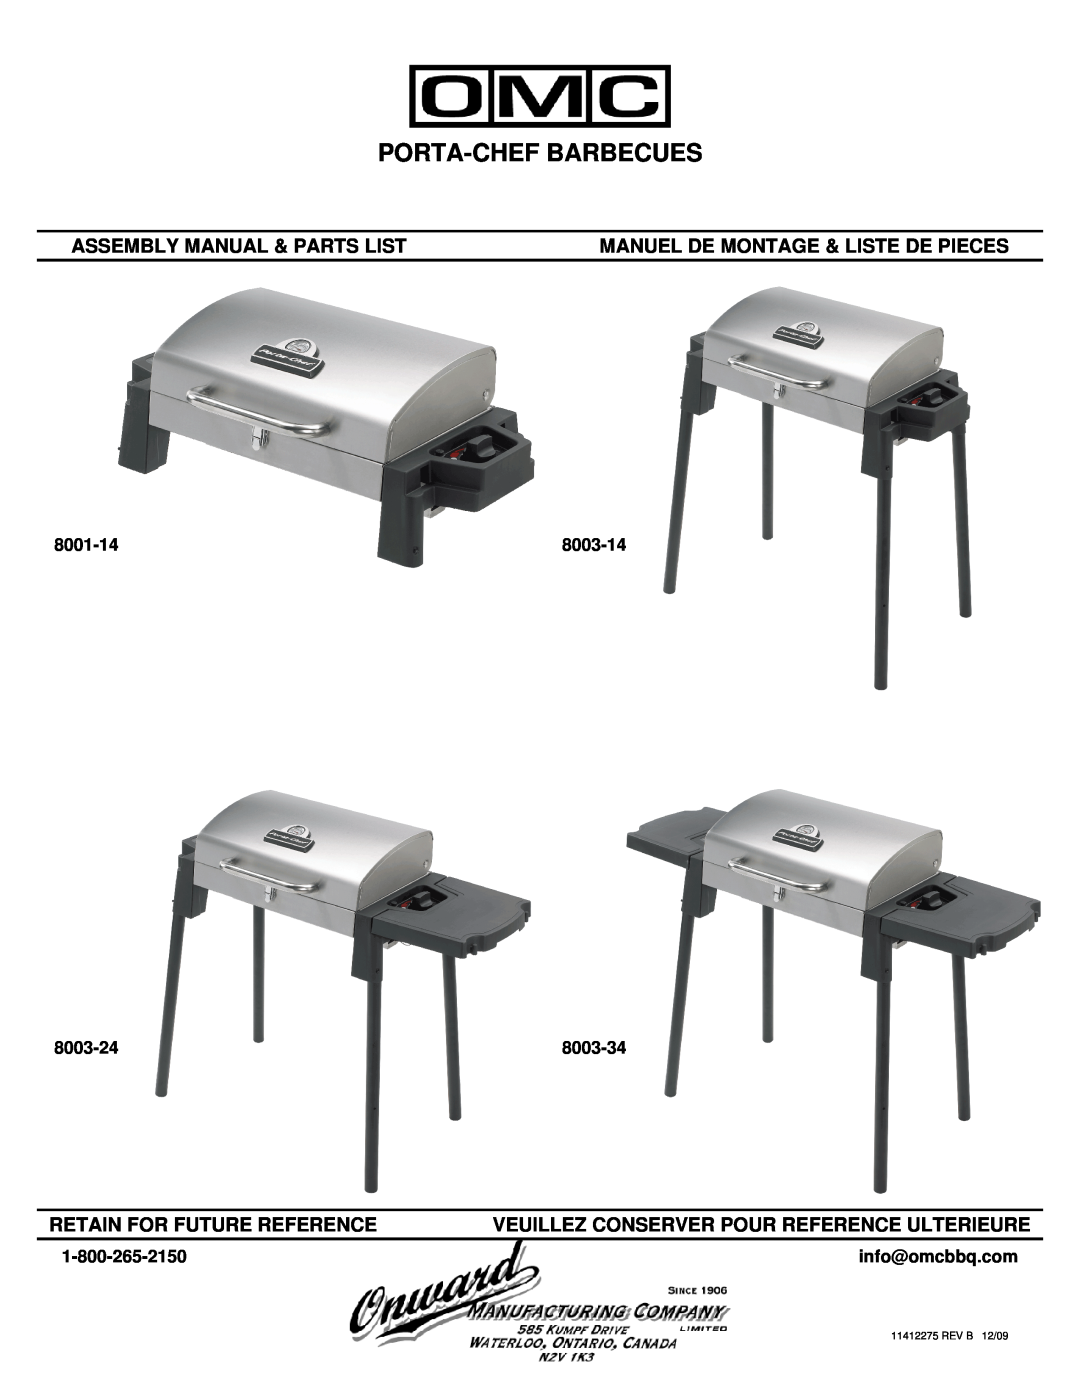 Broil King 8003-14 manual 8001-14, 8003-24, 8003-34, info@omcbbq.com, Porta-Chef Barbecues, Assembly Manual & Parts List 